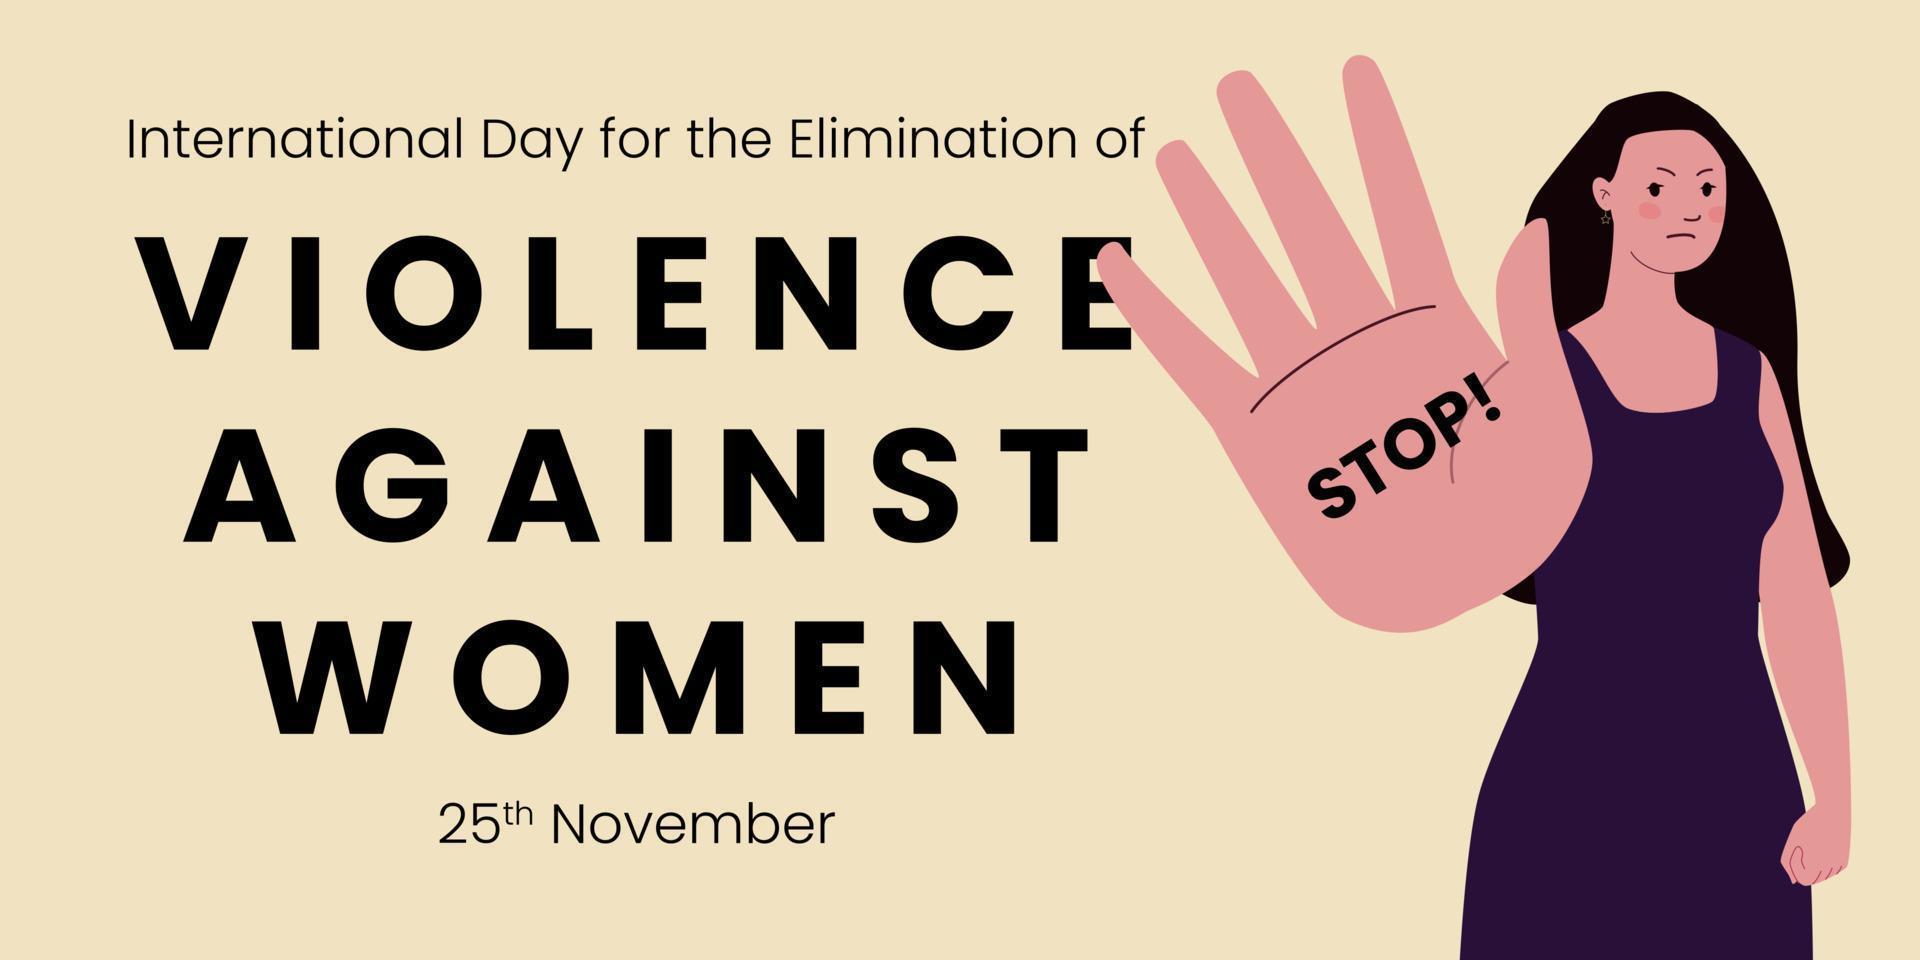 International Day for the Elimination of Violence Against Women with women clenching their fists and making a gesture of resistance. vector